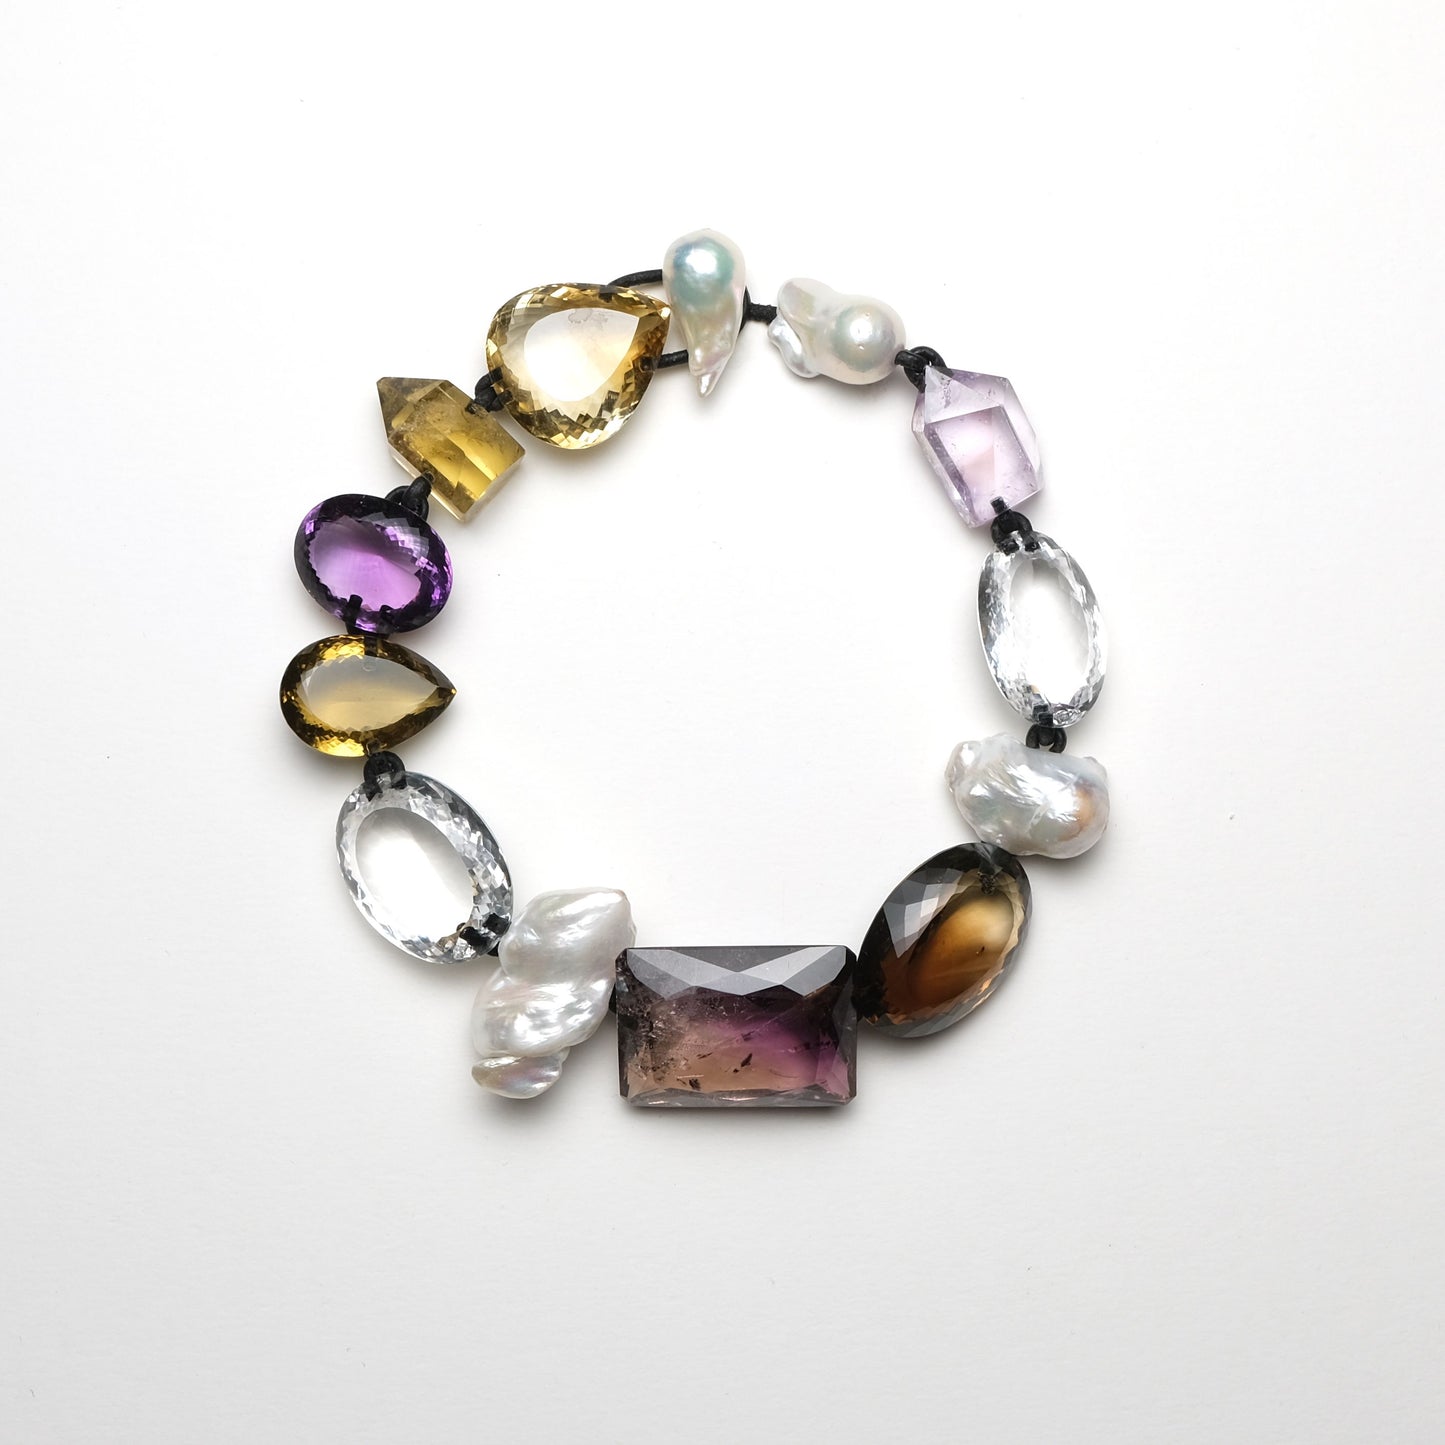 Necklace in amethyst, baroque pearls, citrine and mountain crystal